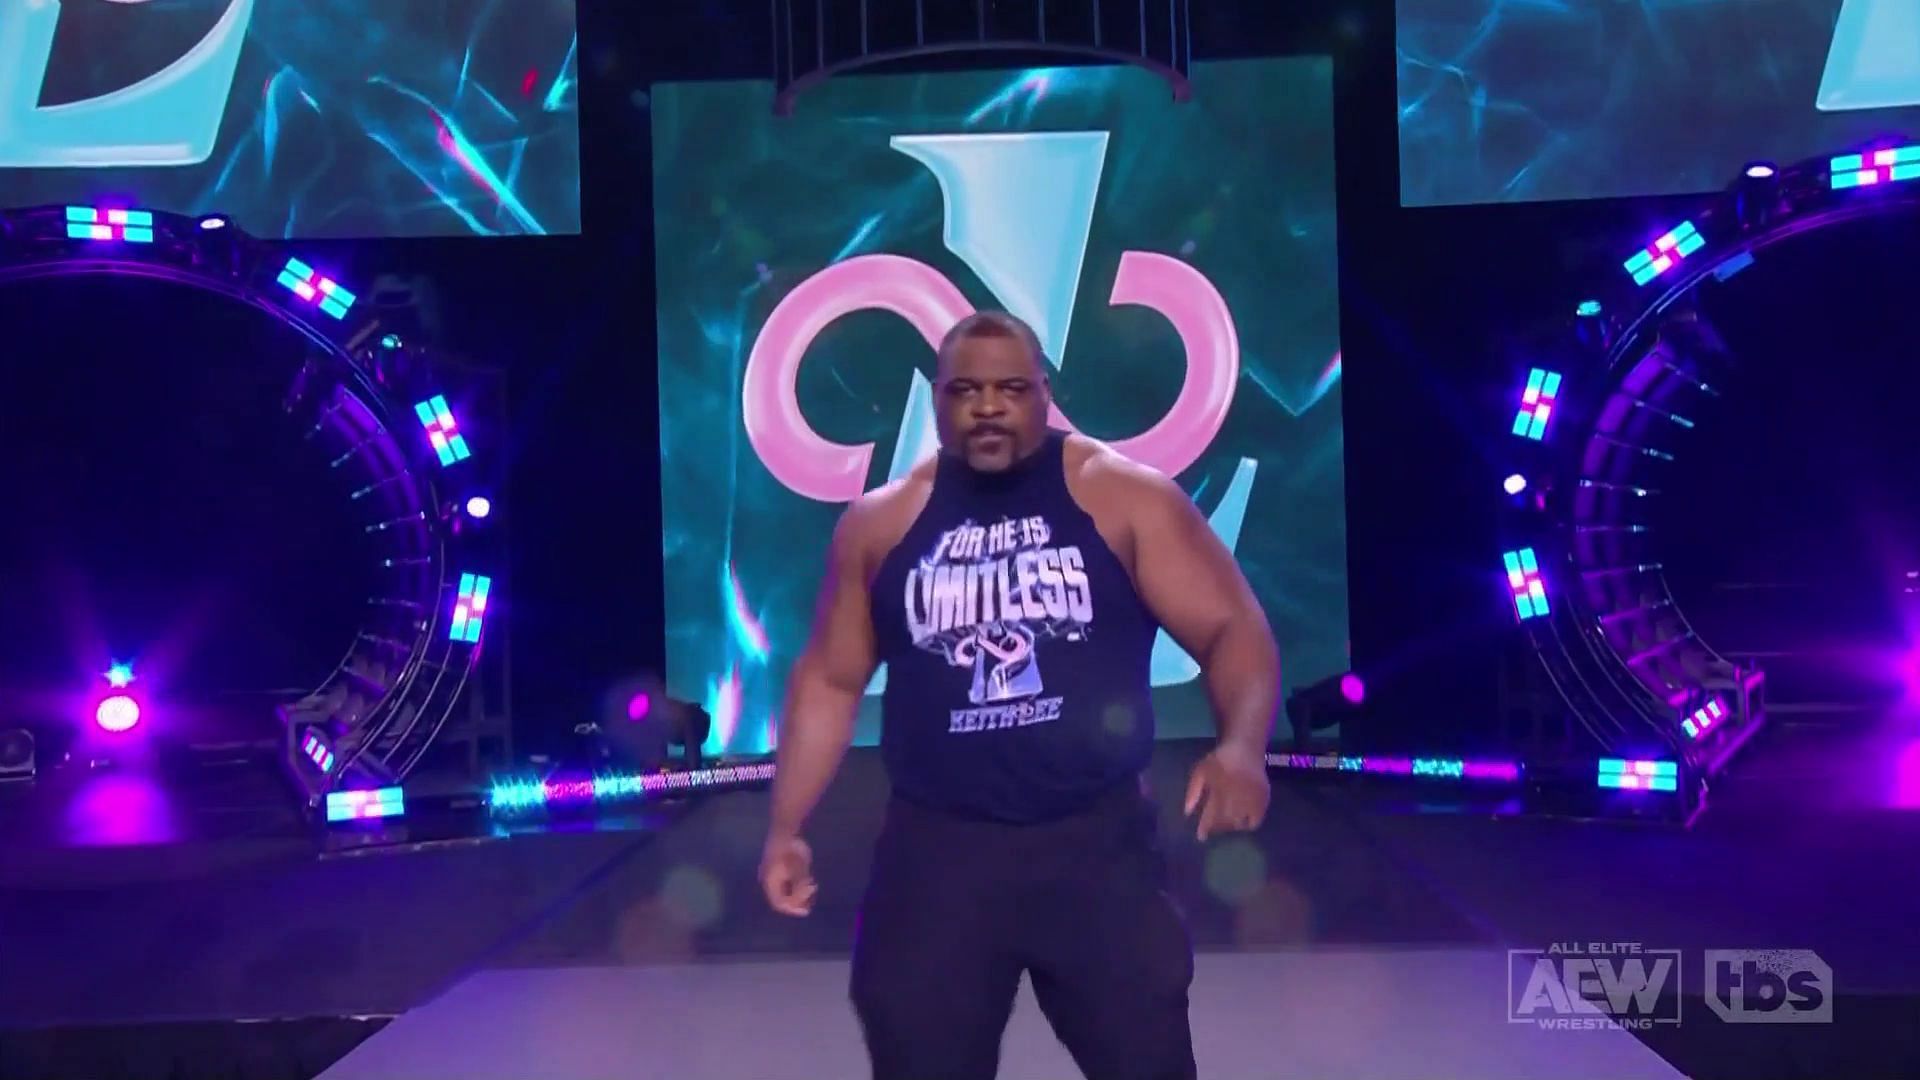 Keith Lee marching down the ramp during the recent AEW Dynamite episode.